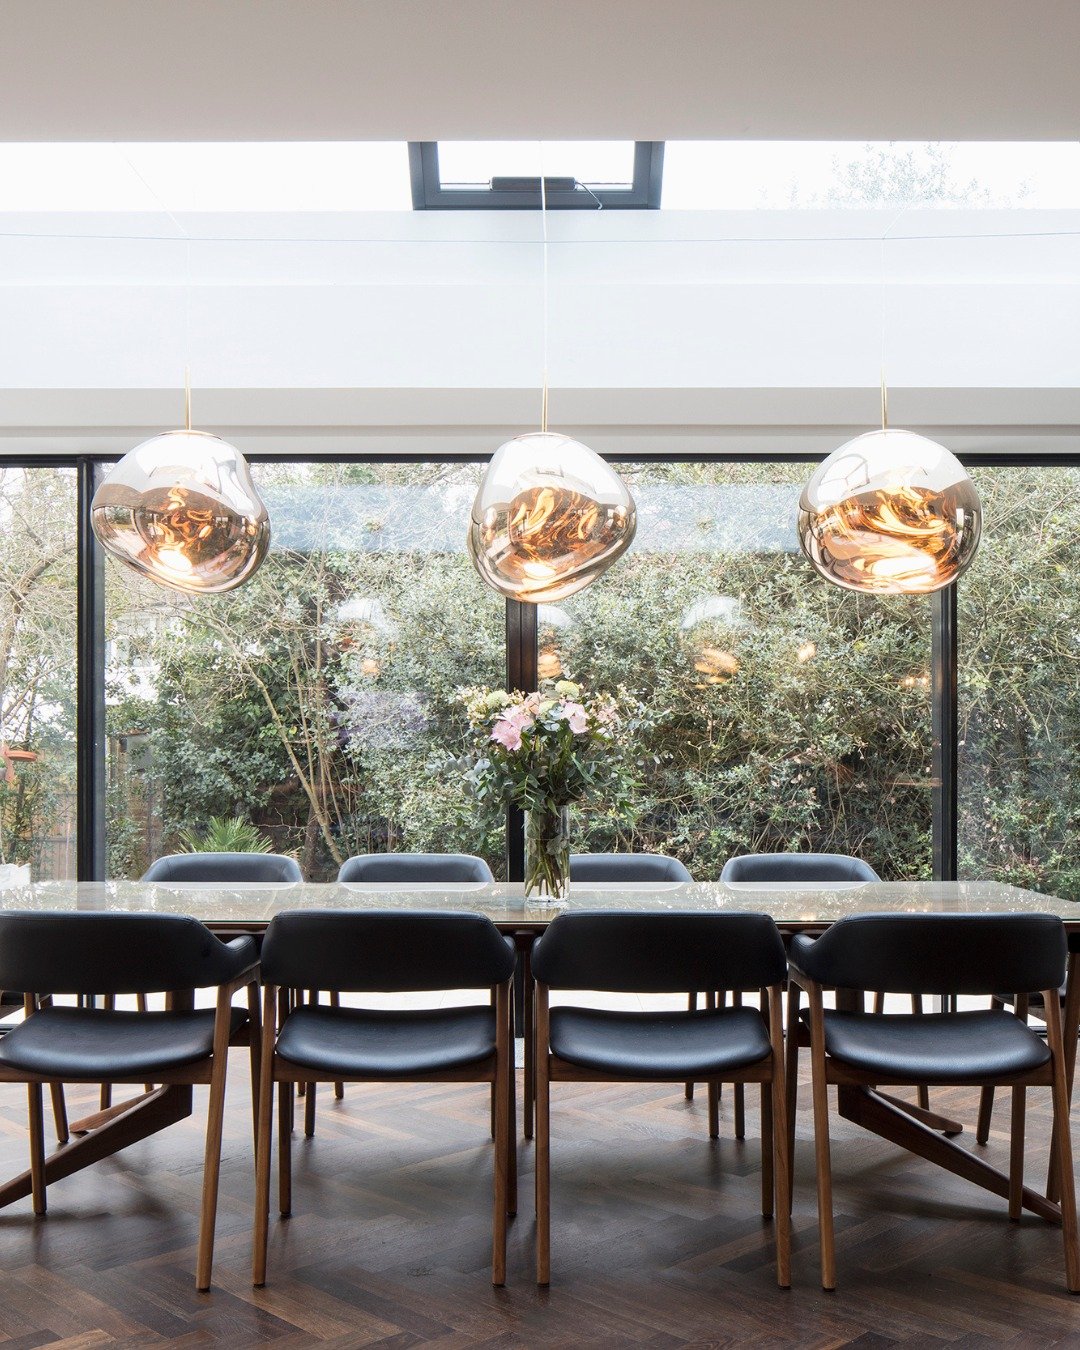 Let us brighten up your space with the perfect hanging pendant lighting 🔆

Our skilled electricians work closely with interior designers and architects to ensure that each lighting installation not only enhances the aesthetics of your room but also 